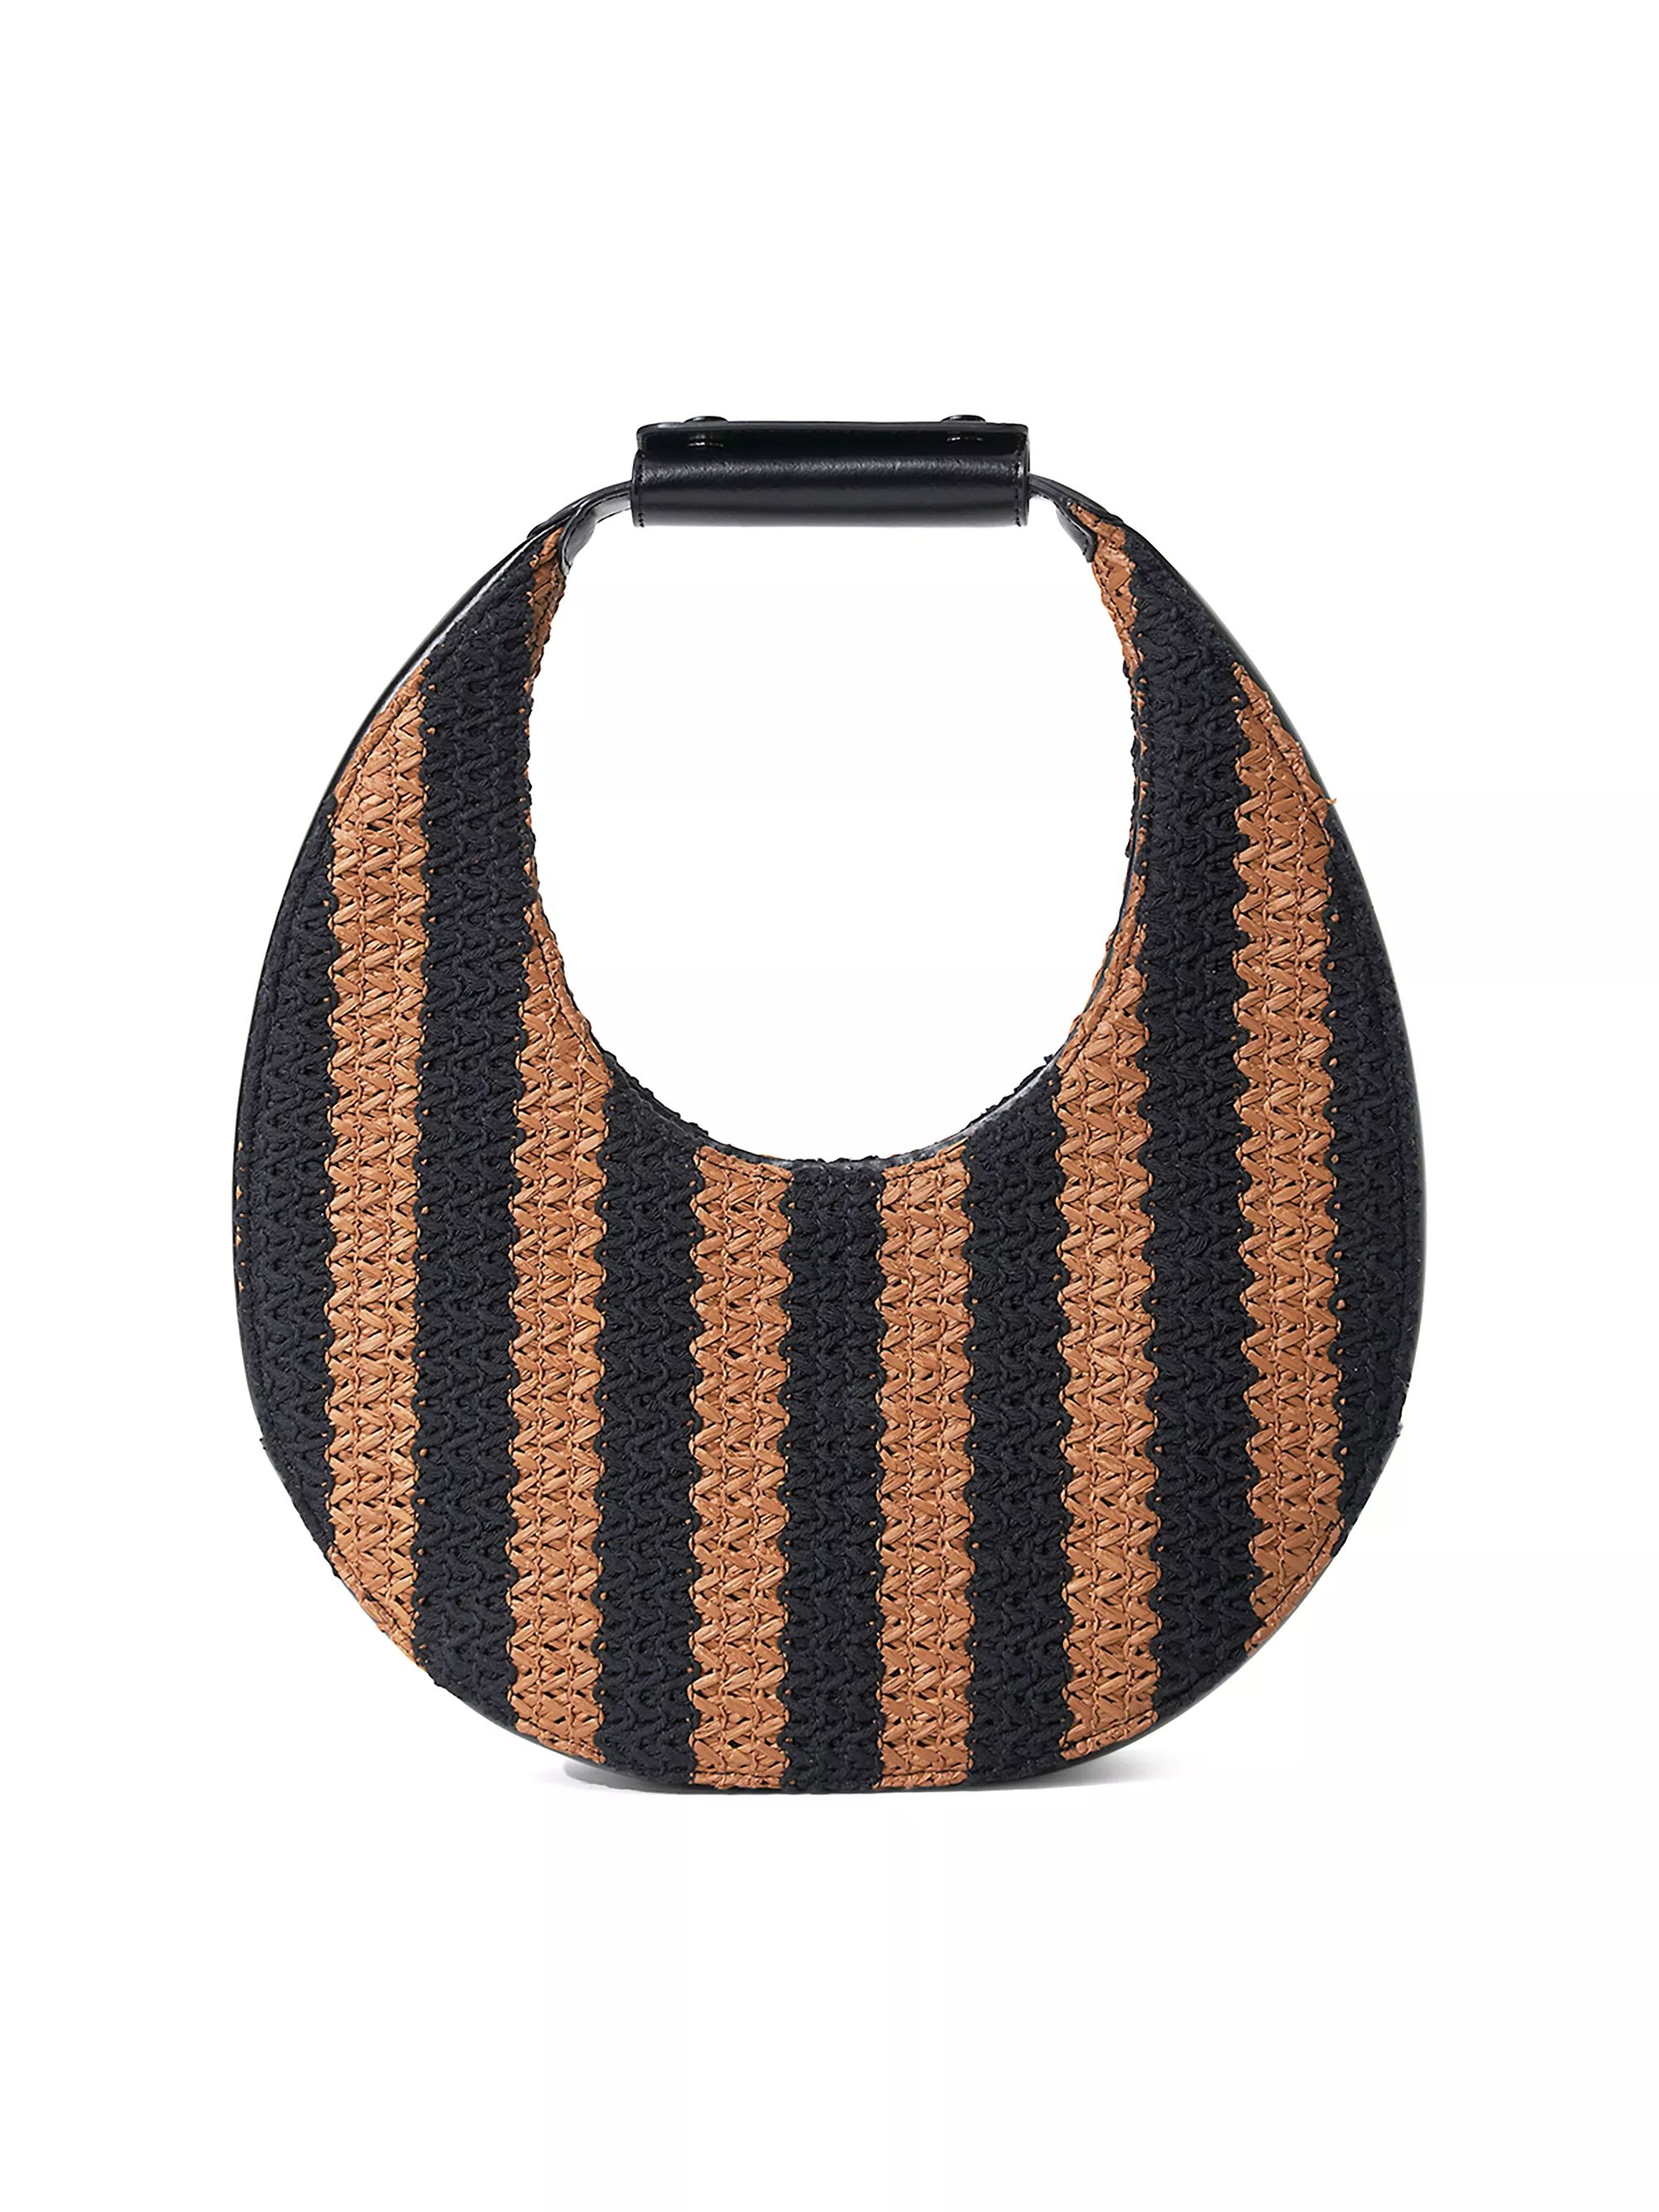 Shop Staud Moon Leather-Trimmed Striped Woven Tote Bag | Saks Fifth Avenue | Saks Fifth Avenue